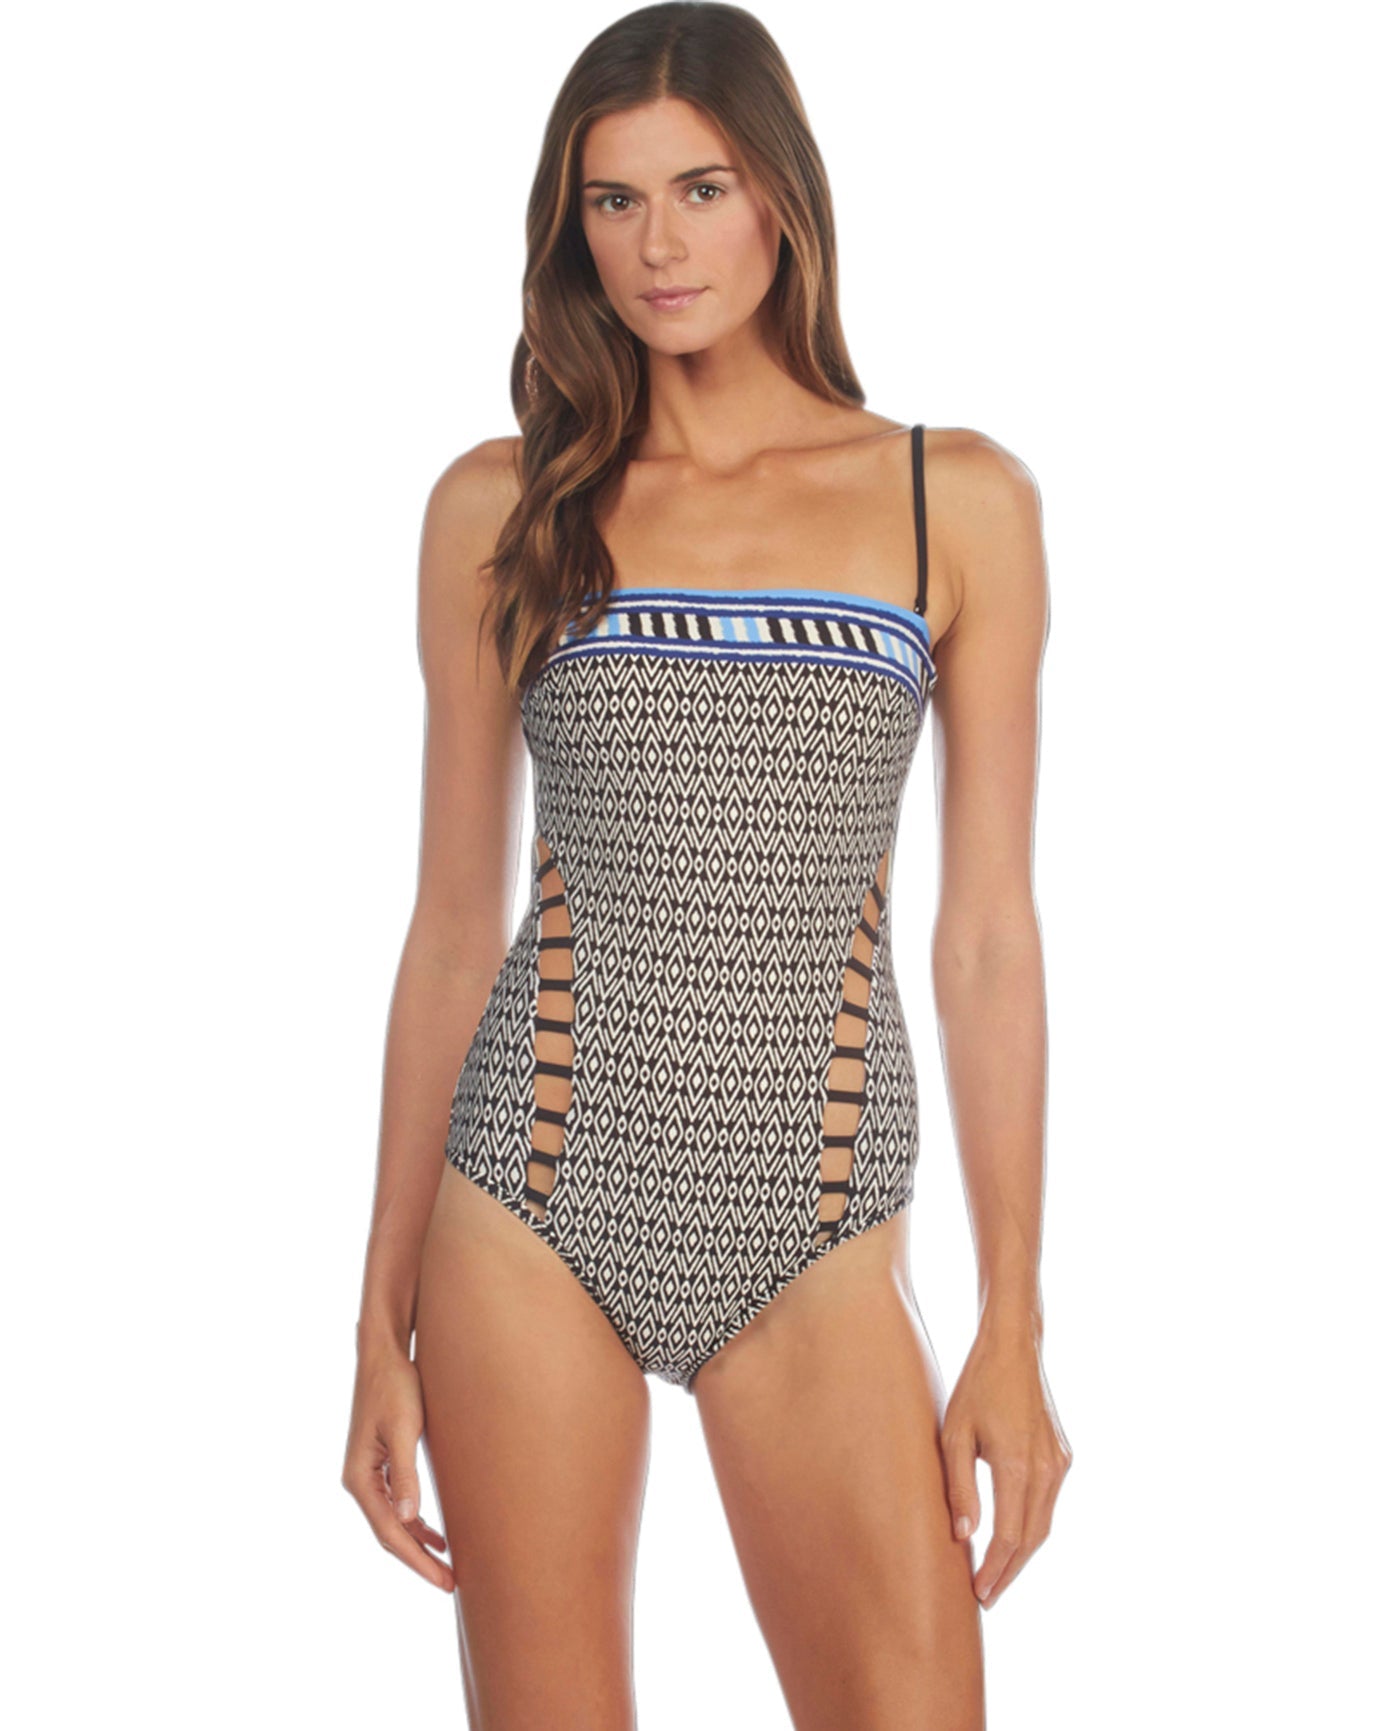 Front View Of Kenneth Cole Tribal Beat Bandeau Cut Out One Piece Swimsuit | KKC Tribal Beat Brown